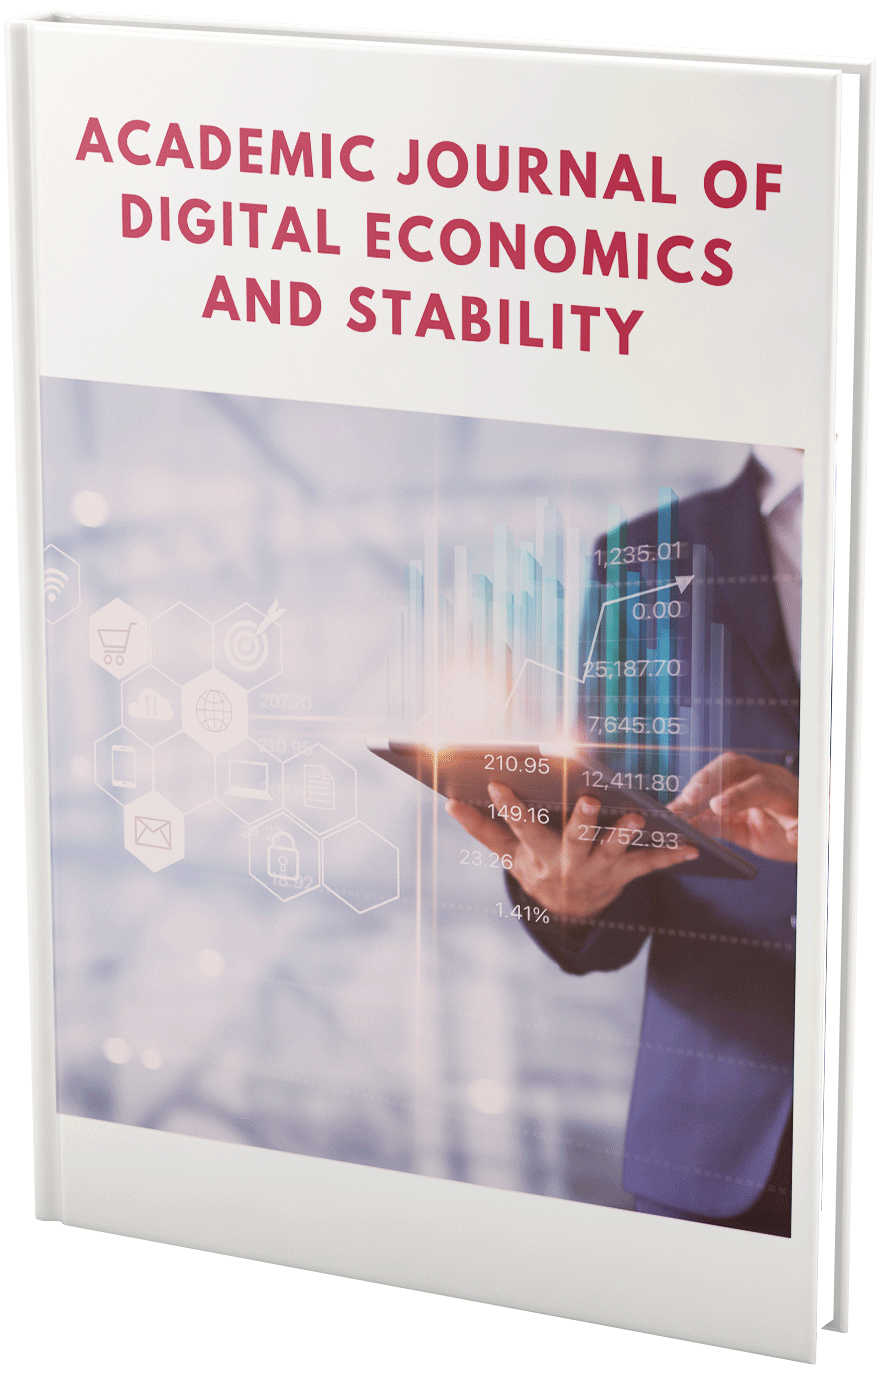 					View Vol. 3 (2021): Academic Journal of Digital Economics and Stability
				